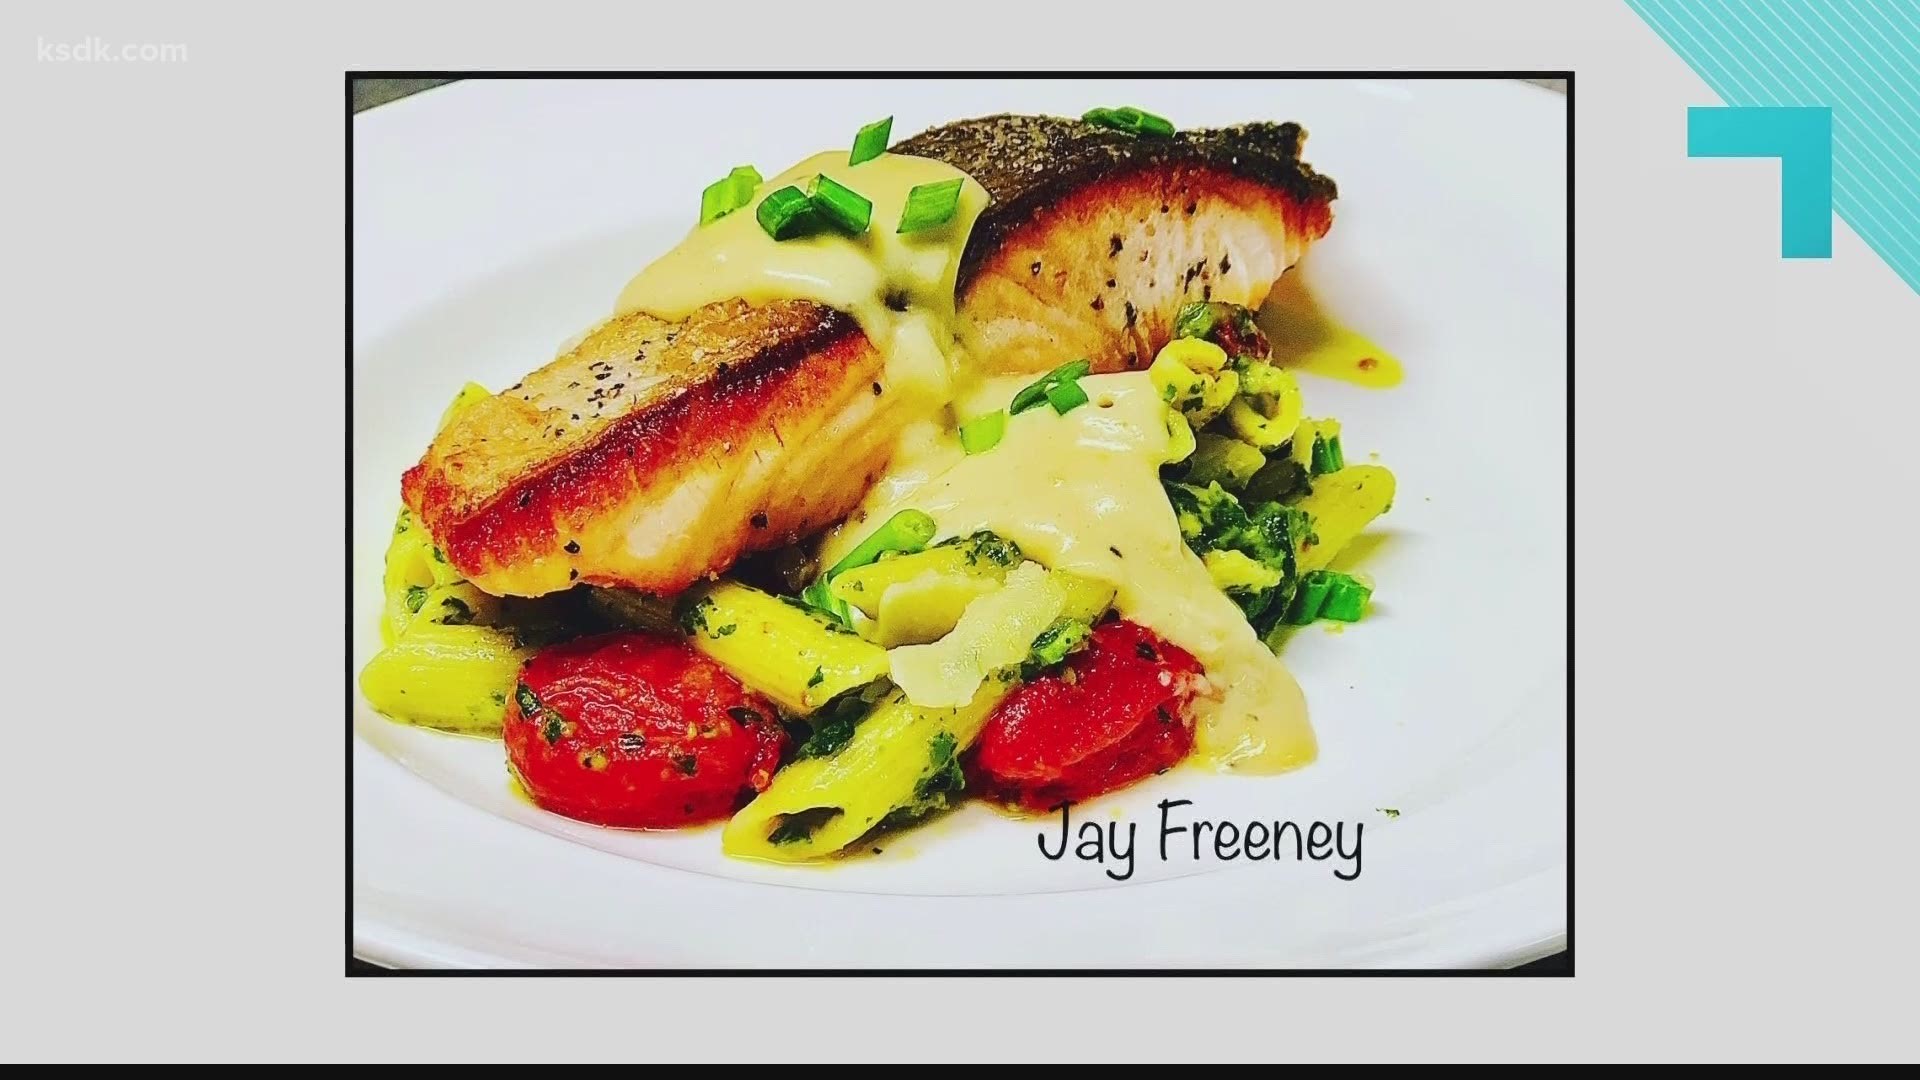 Shared by Chef Jay Freeney of ‘Gourmet by Chef Jay’